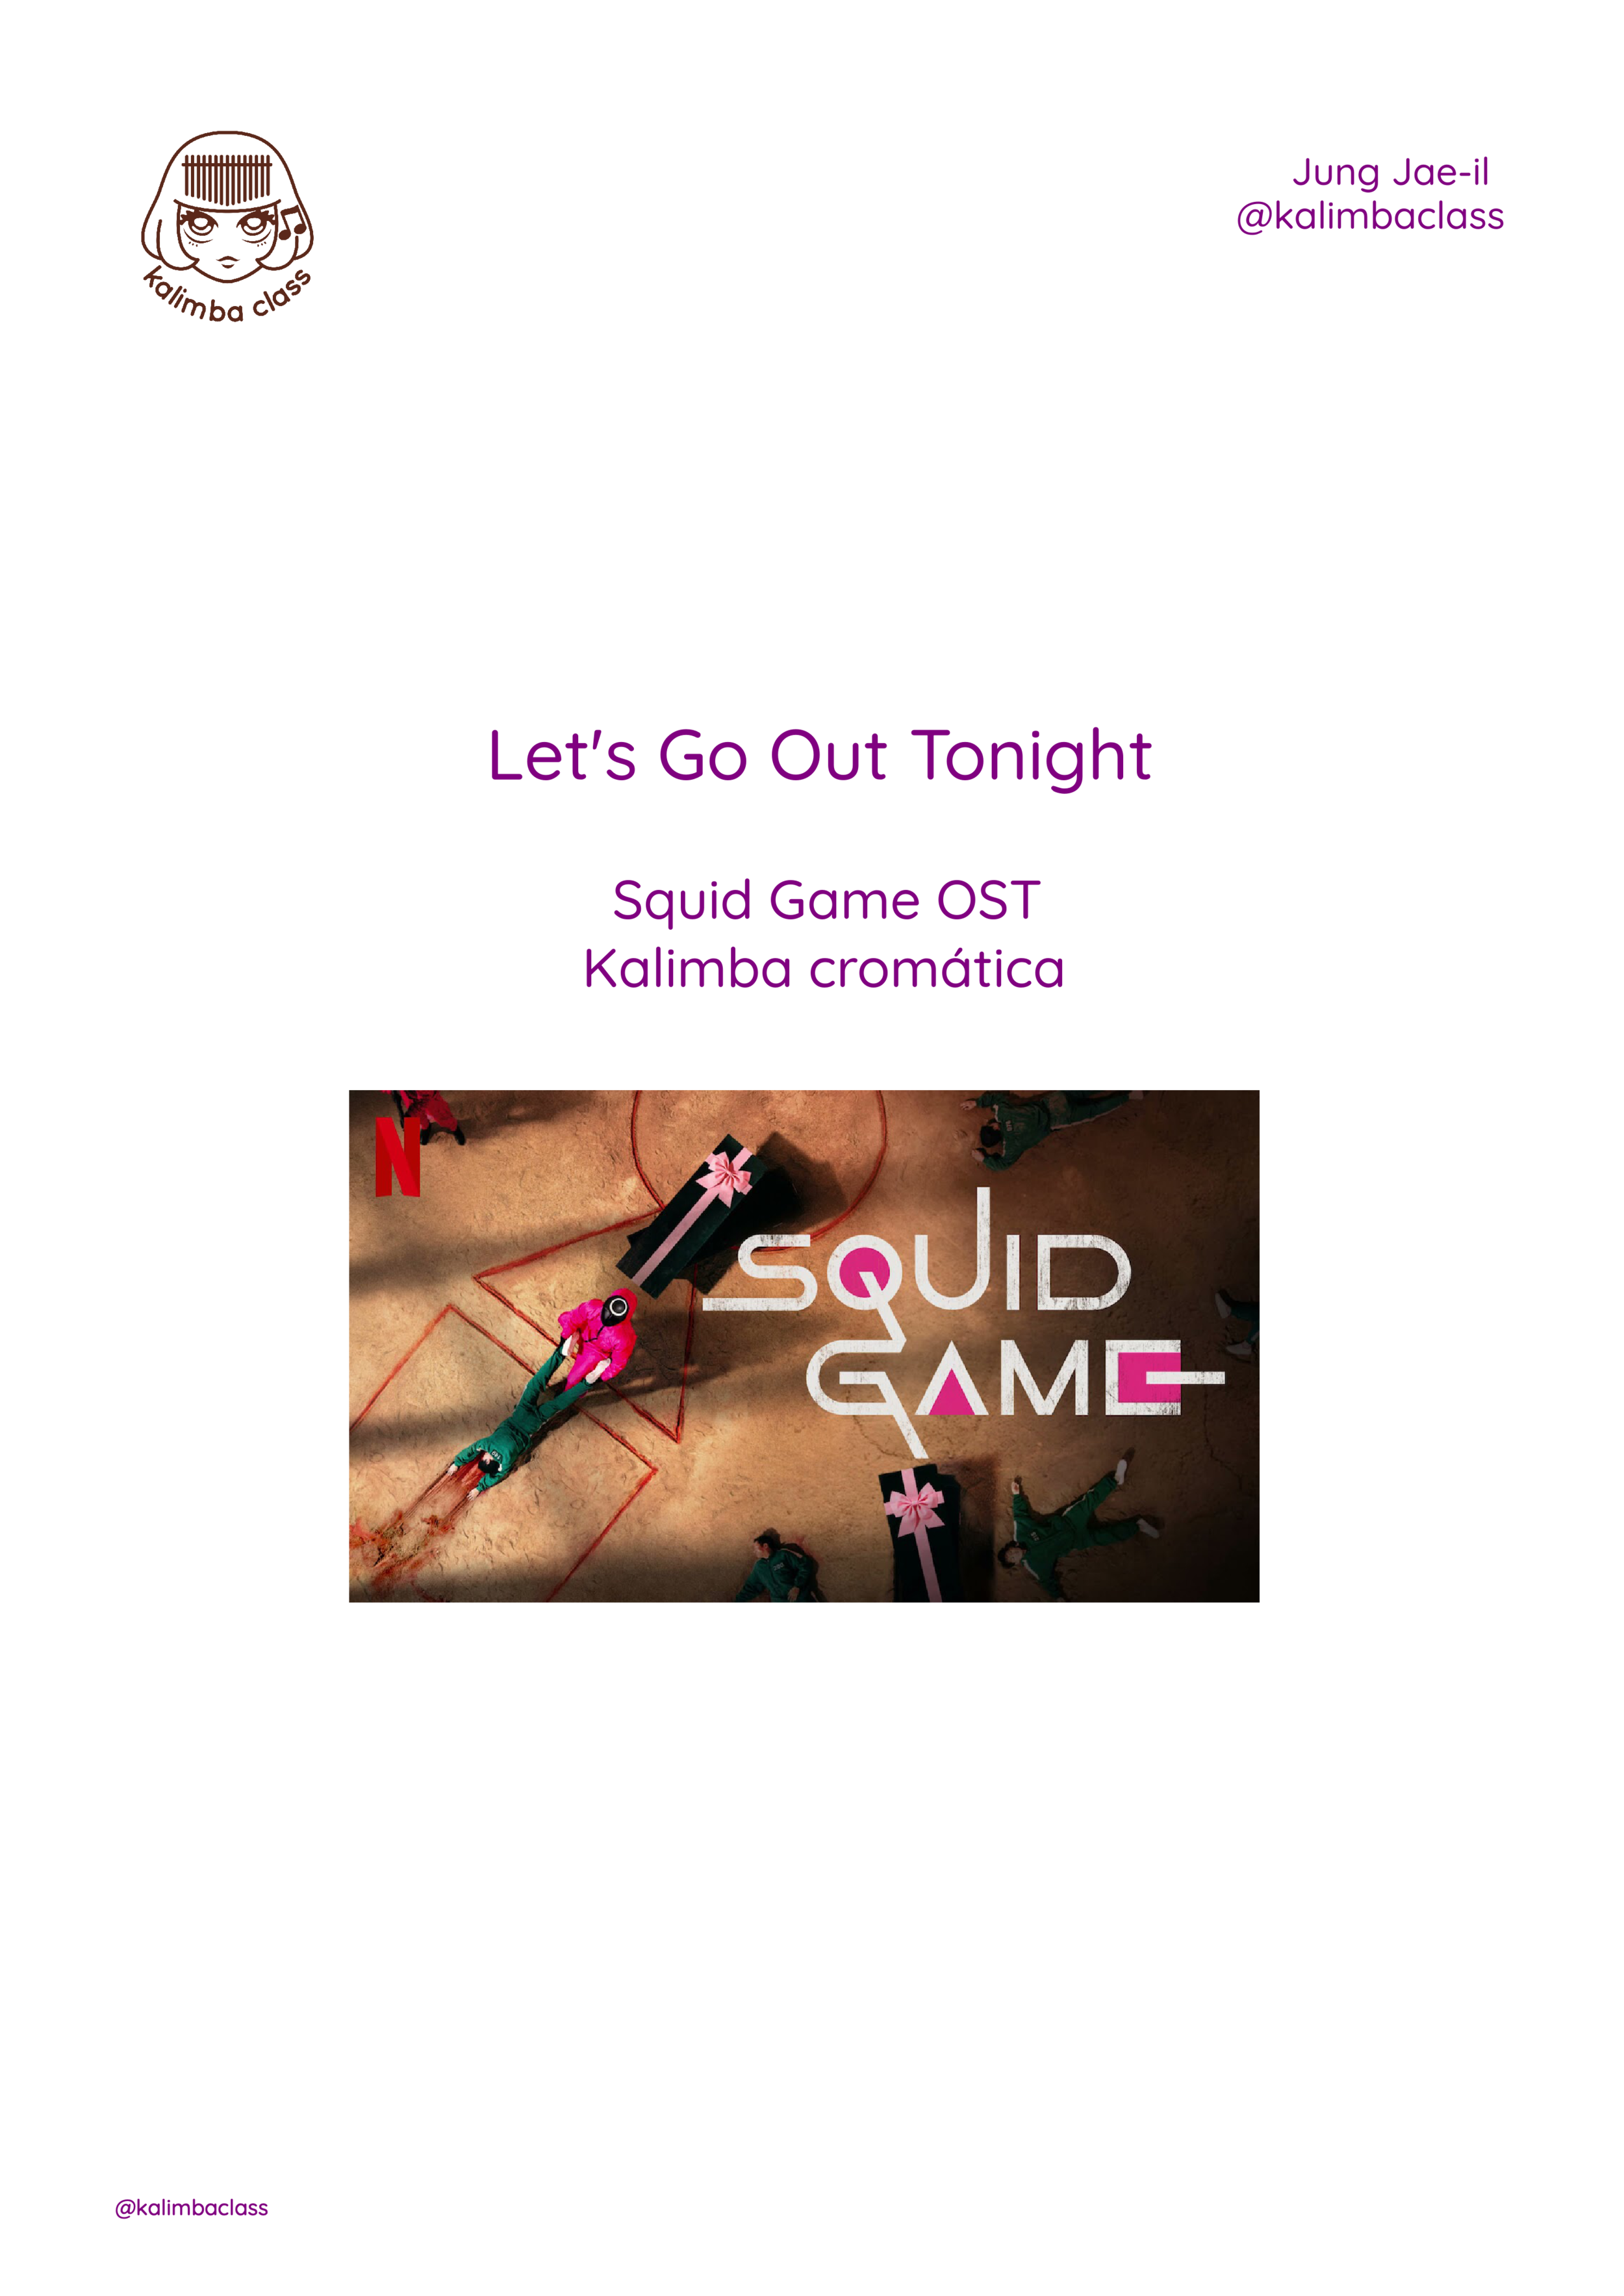 Let's Go Out Tonight, Squid Game OST - Jung Jae-il